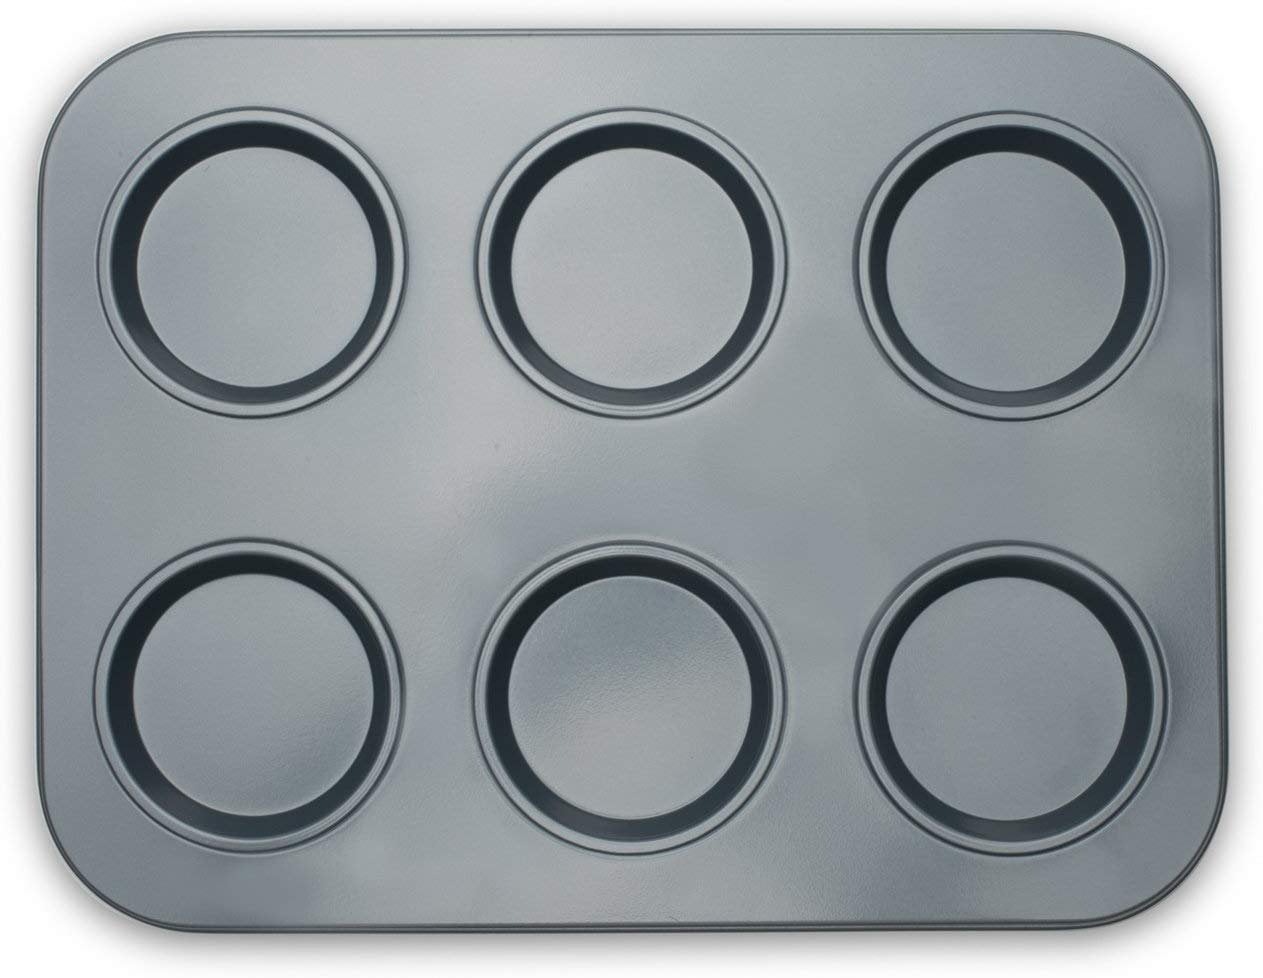 Fox Run Brands Non-Stick 6 Cup Large Shallow Muffin Pan & Reviews